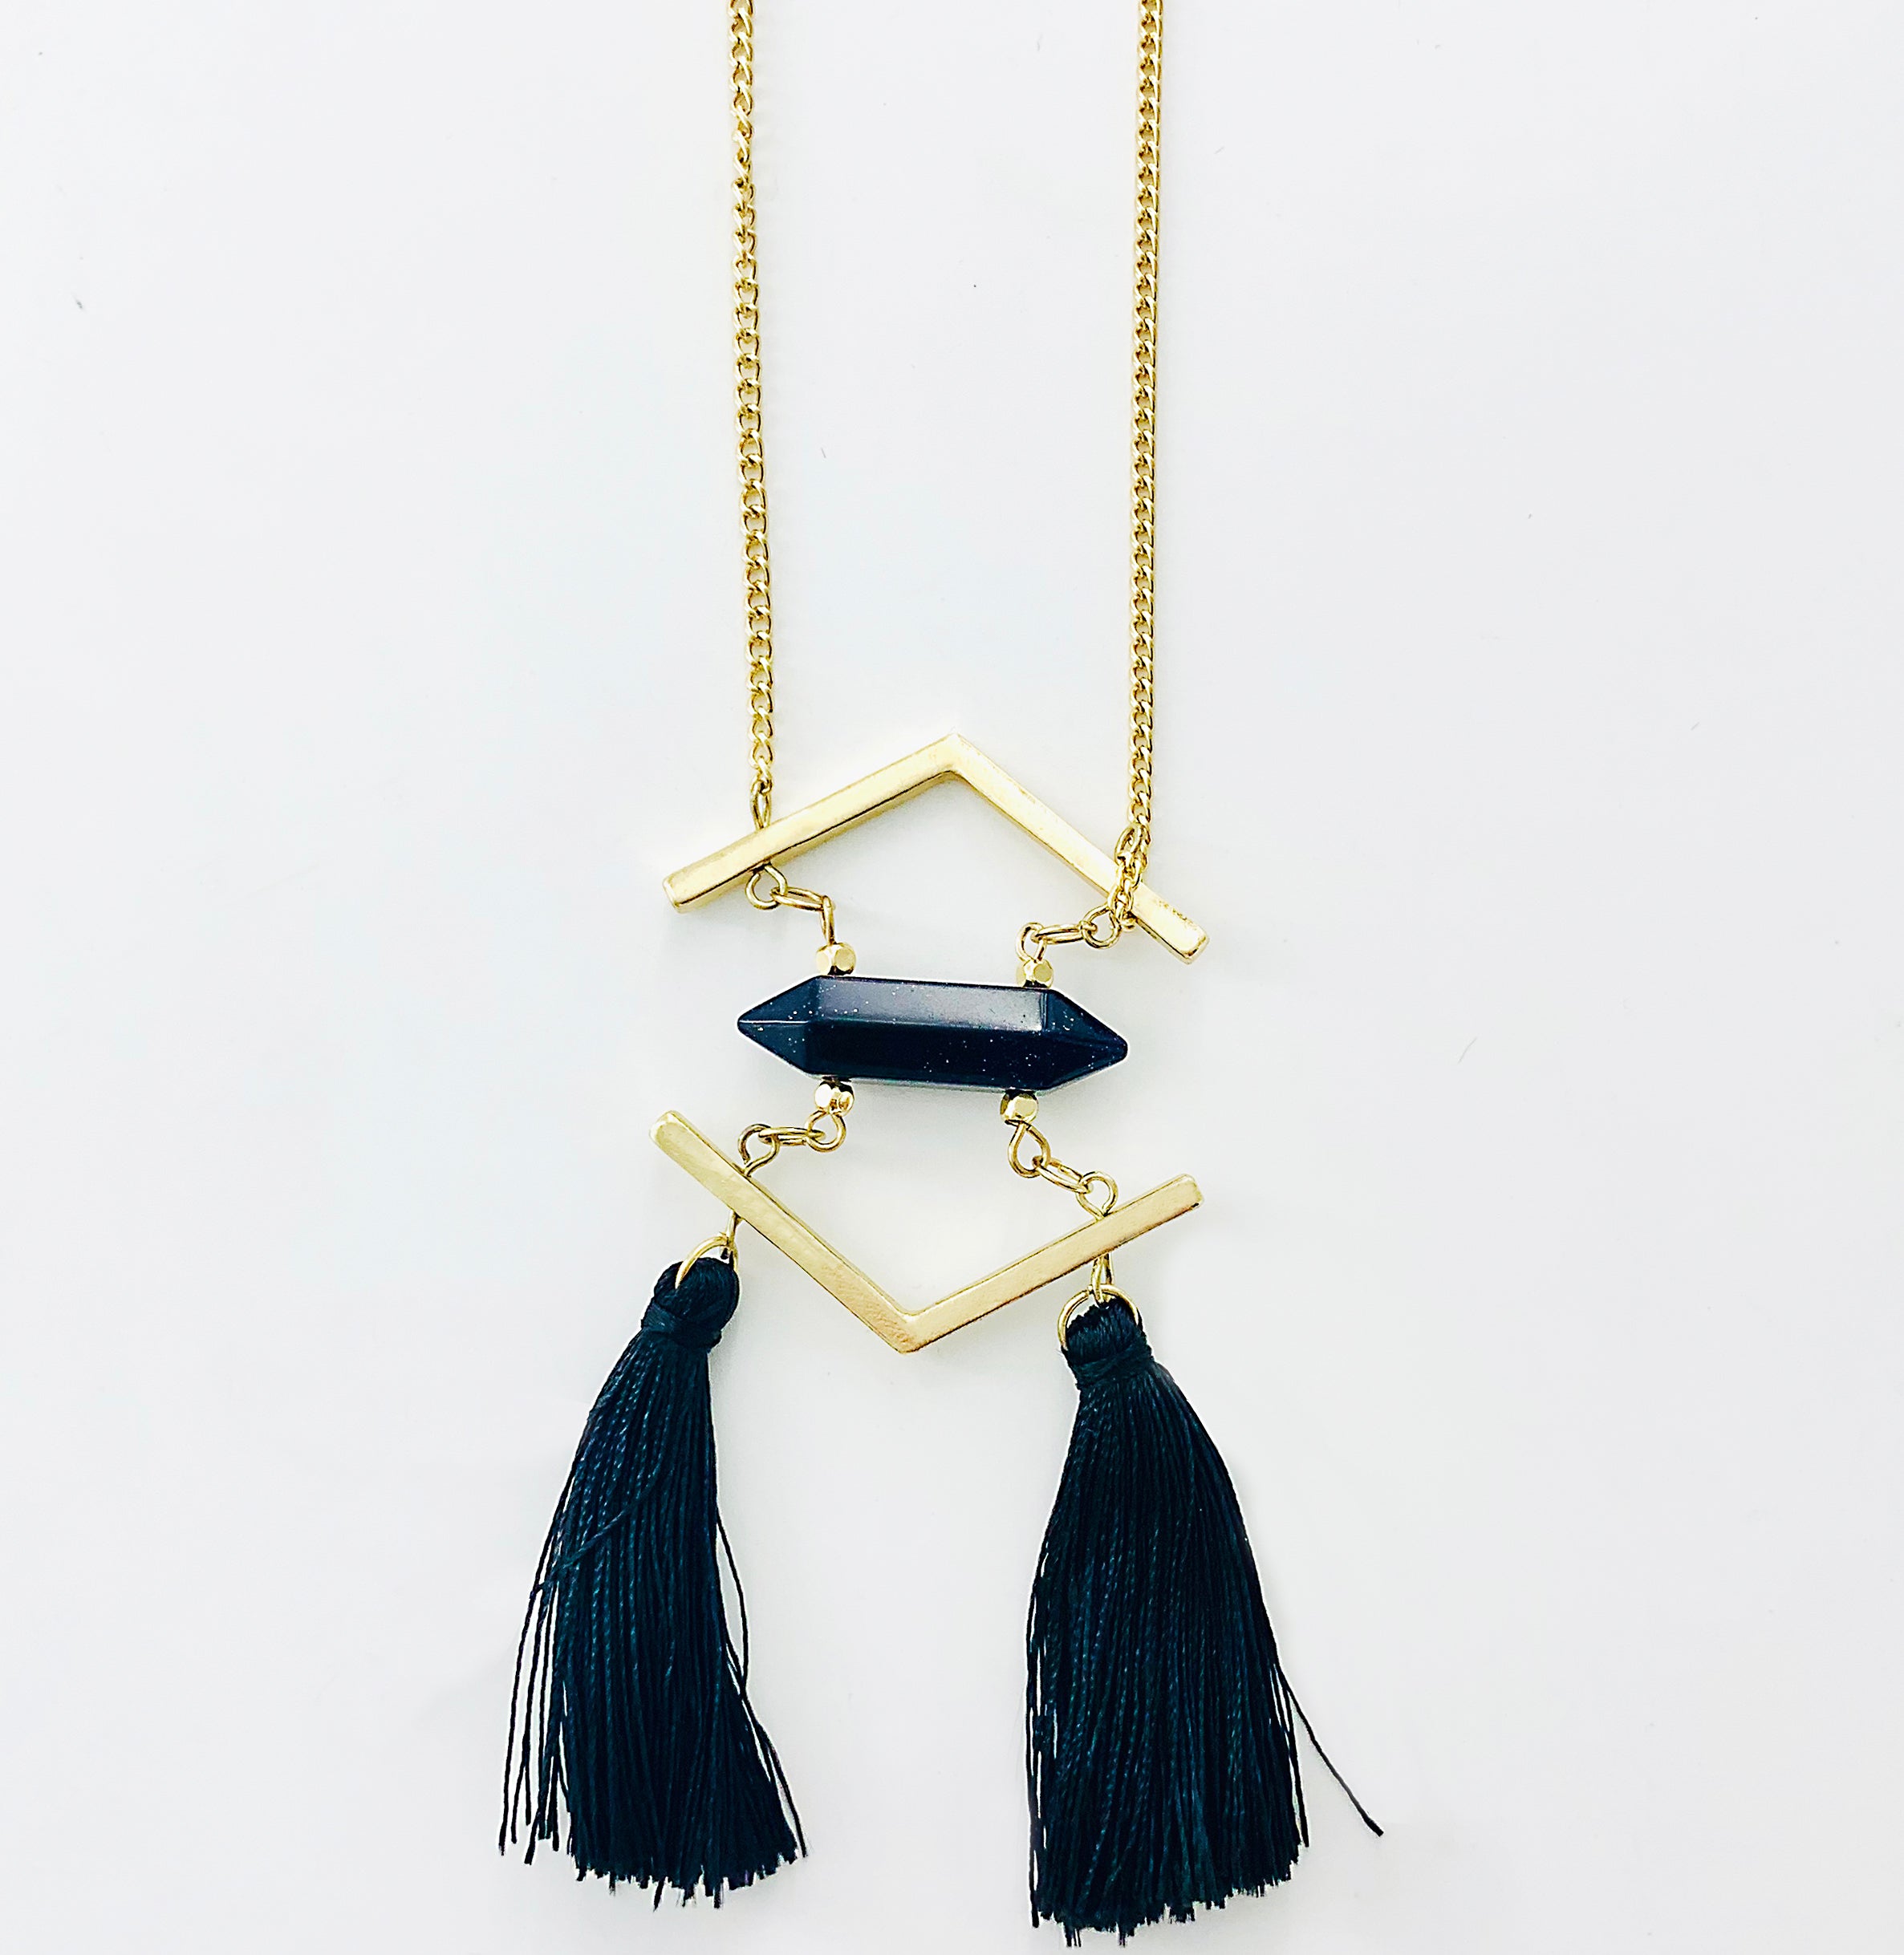 Black Stone with Tassels Pendant on Gold Chain